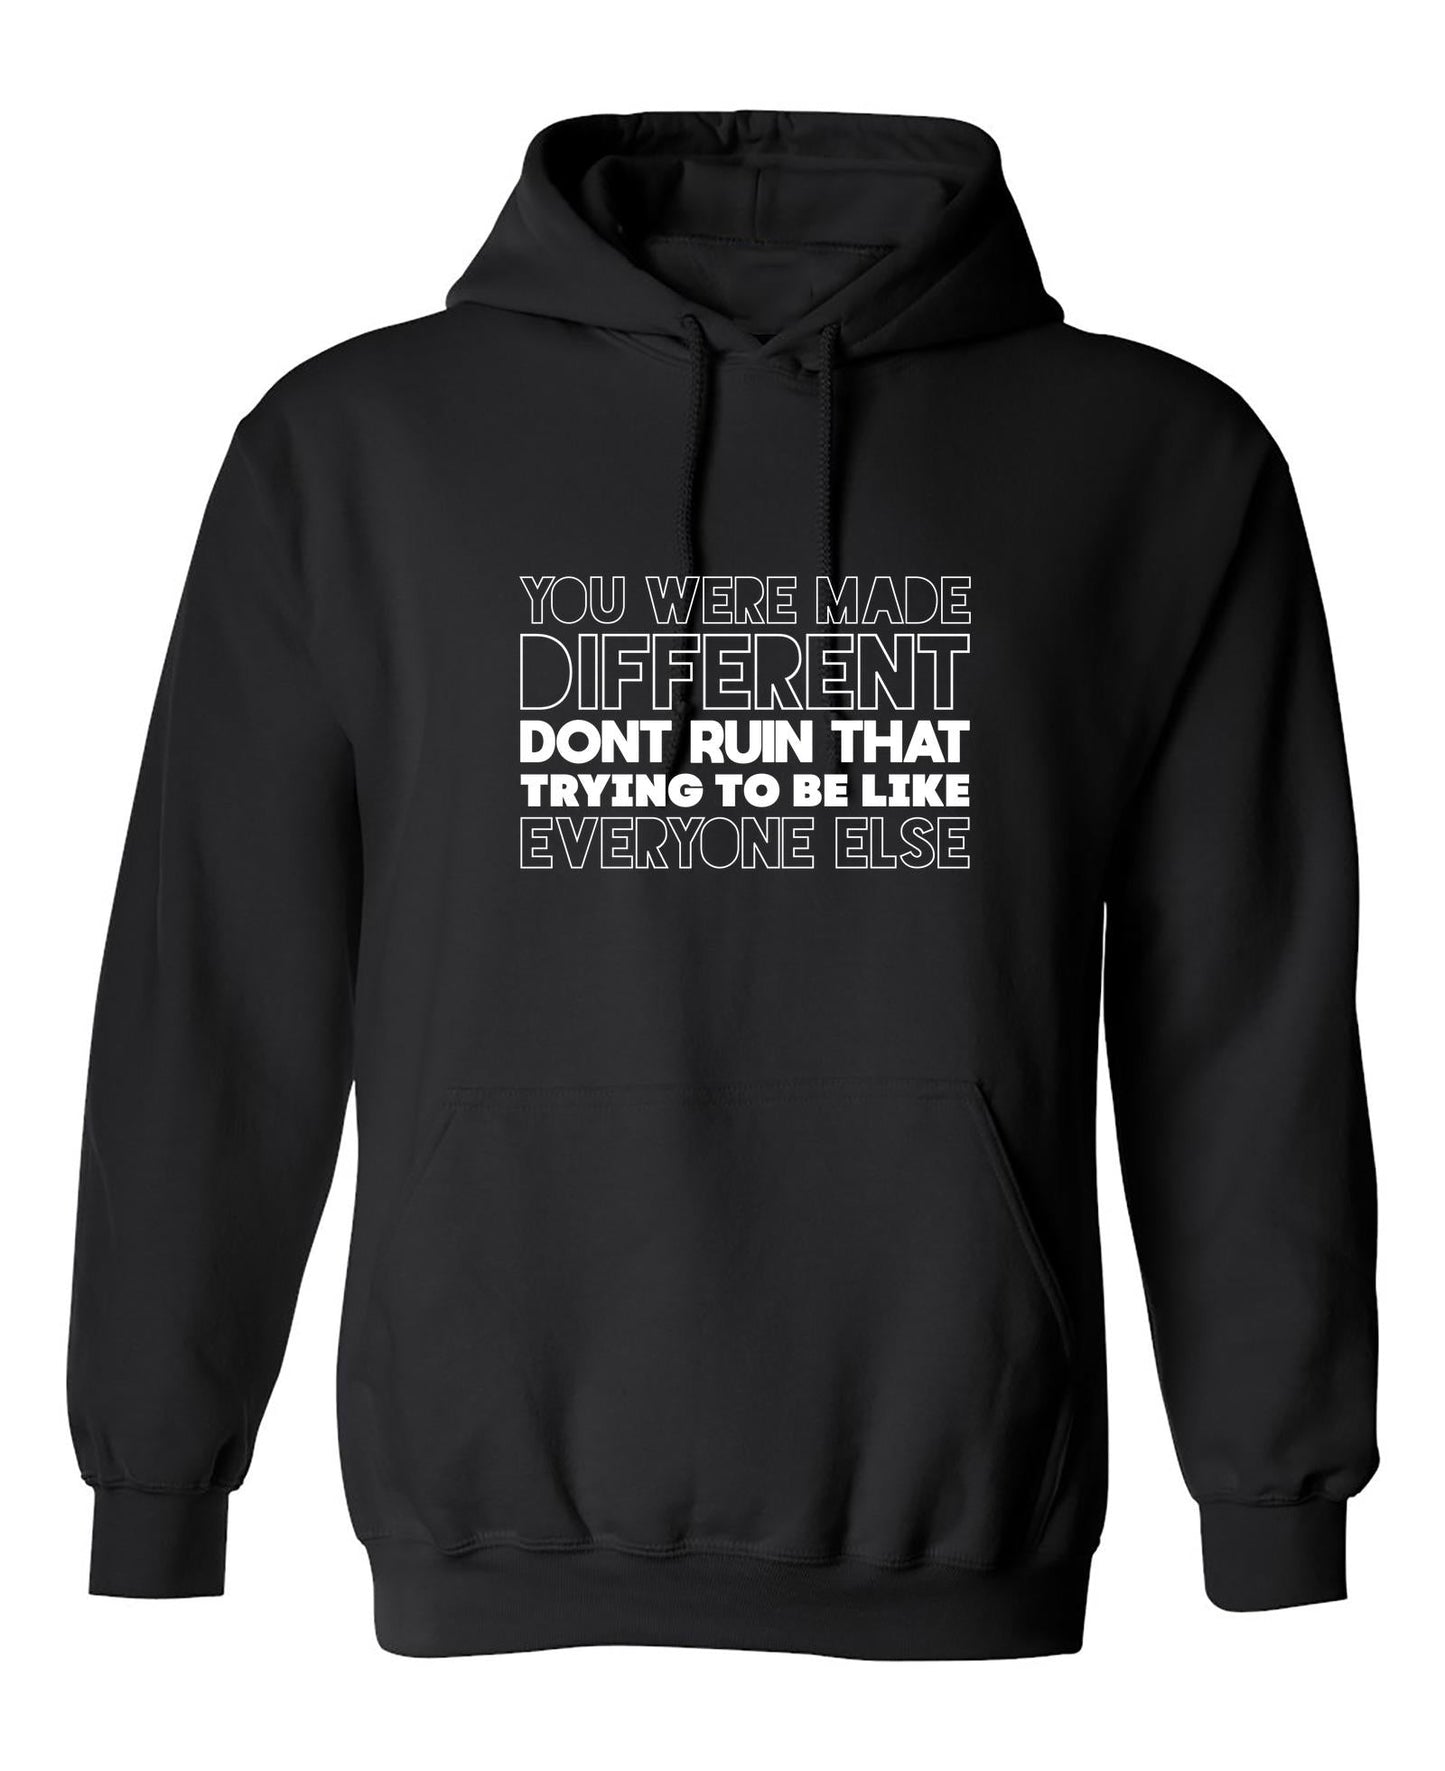 Funny T-Shirts design "You were made Different, Don't Ruin That Trying to be like Everyone else"